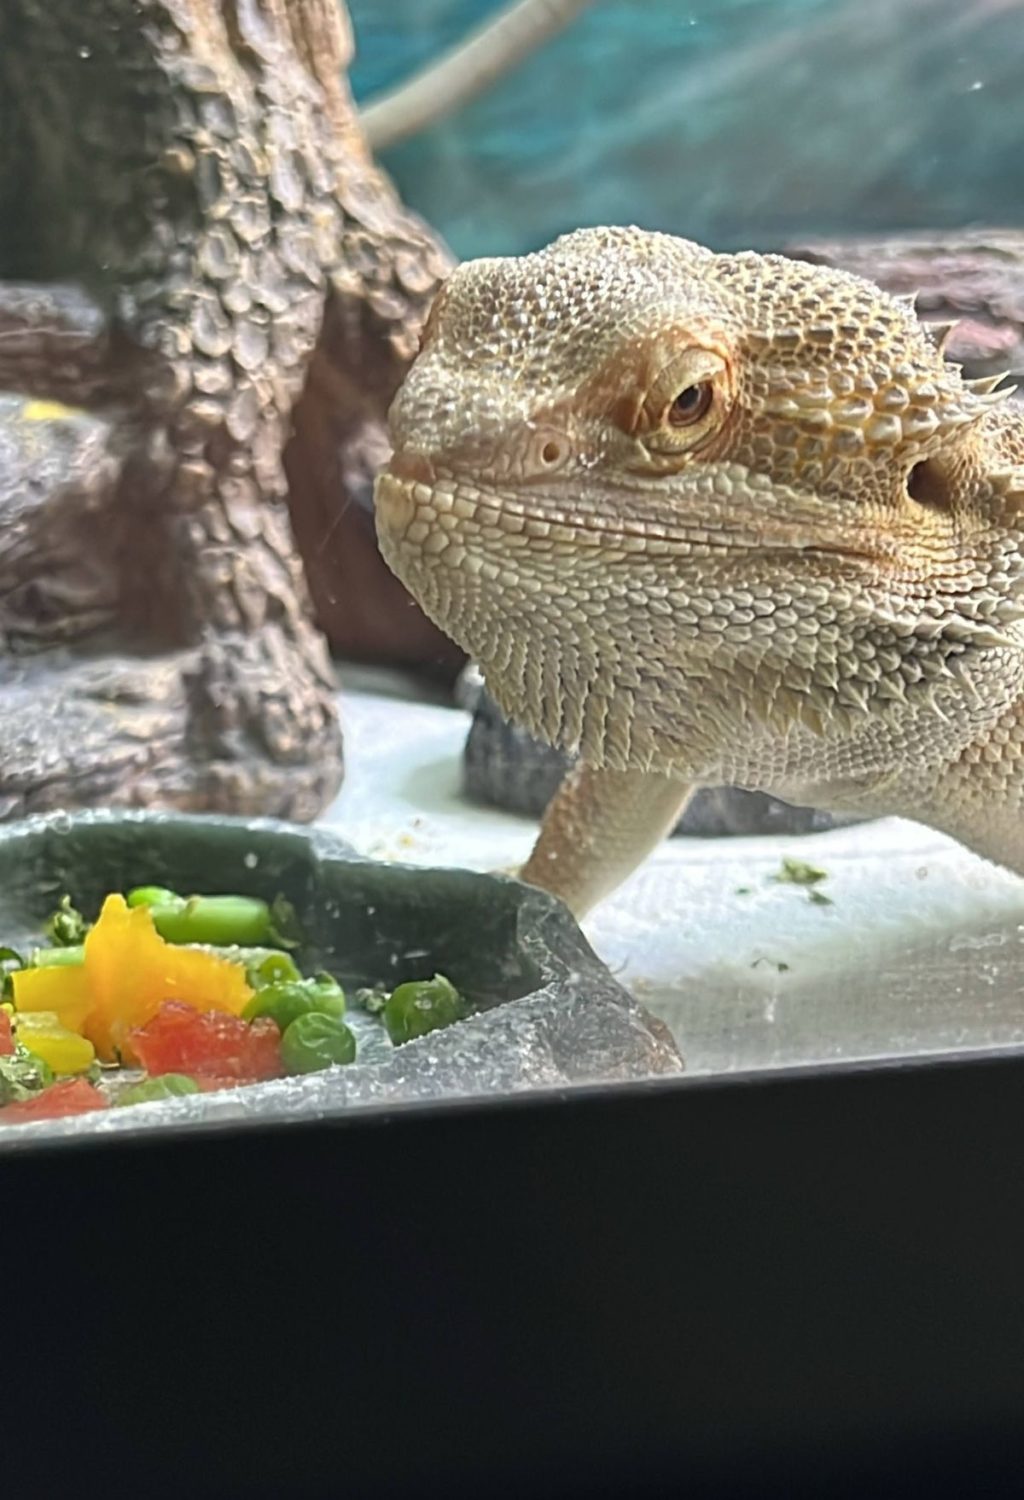 A bearded dragon eating a bowl of food.